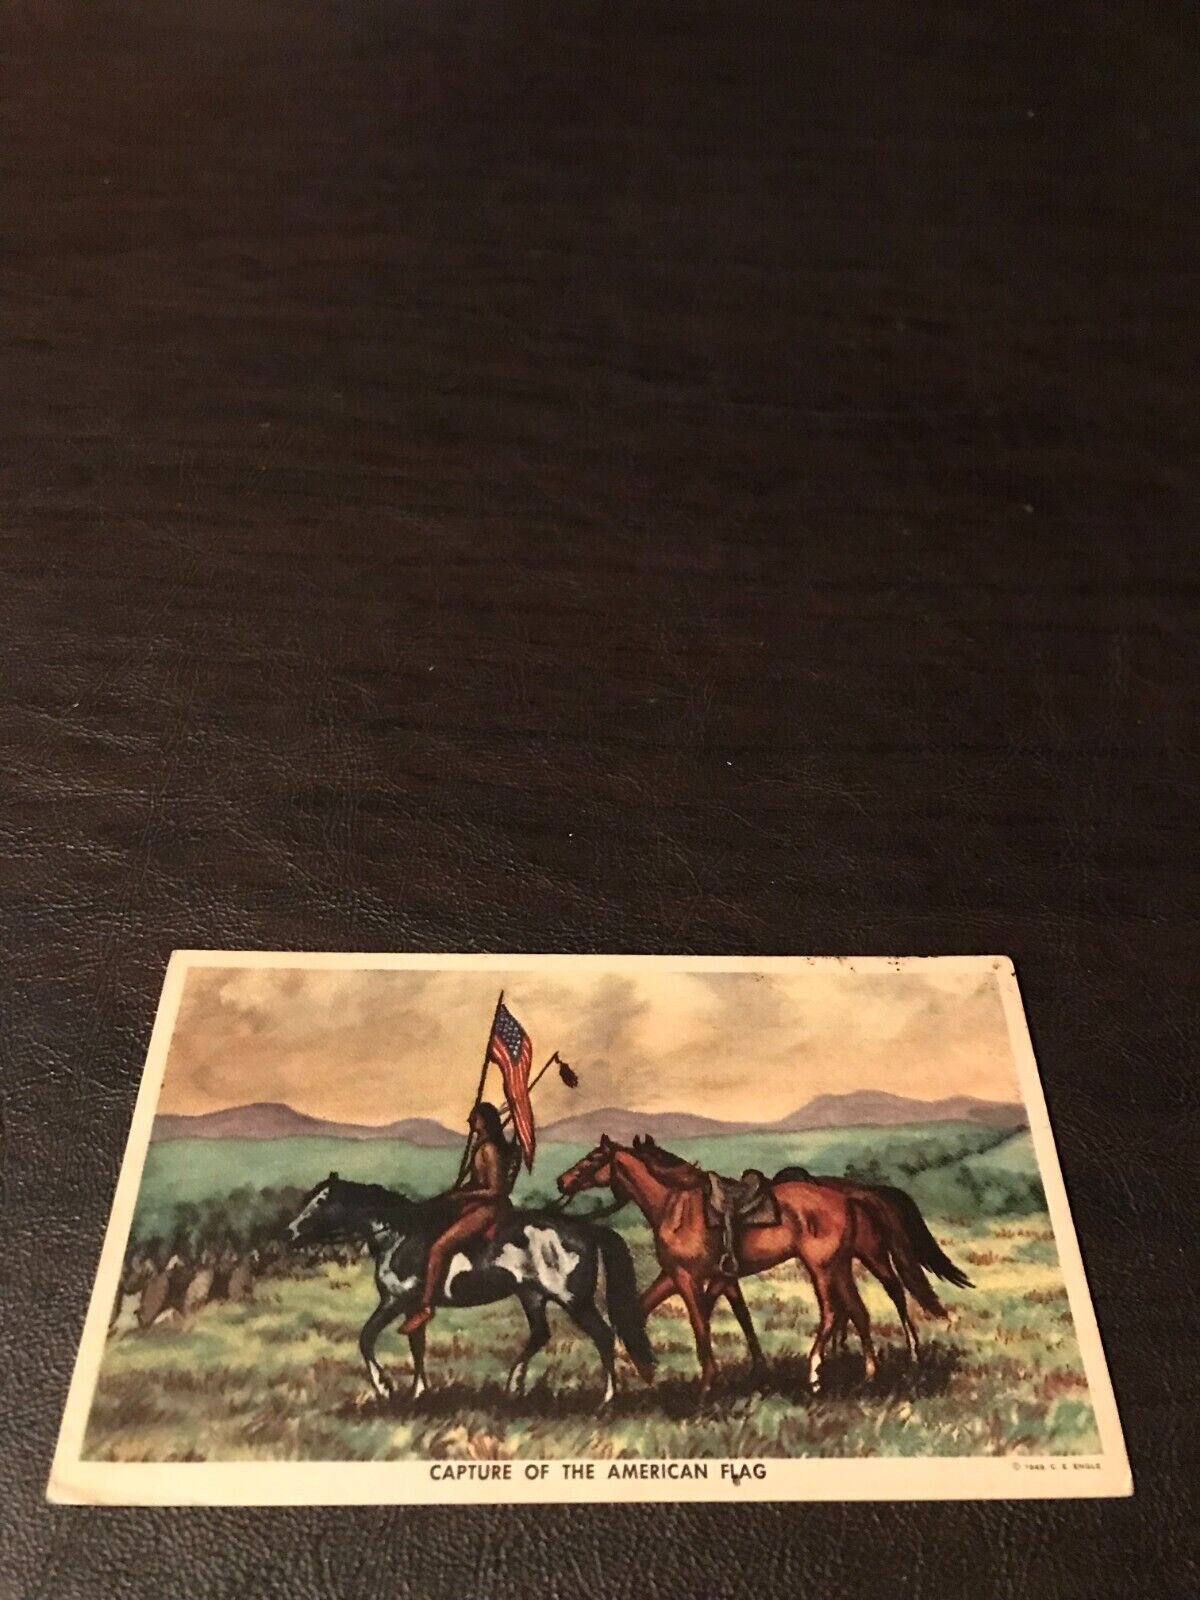 NATIVE AMERICAN - CAPTURE OF THE AMERICAN FLAG - #25 - POSTED POSTCARD